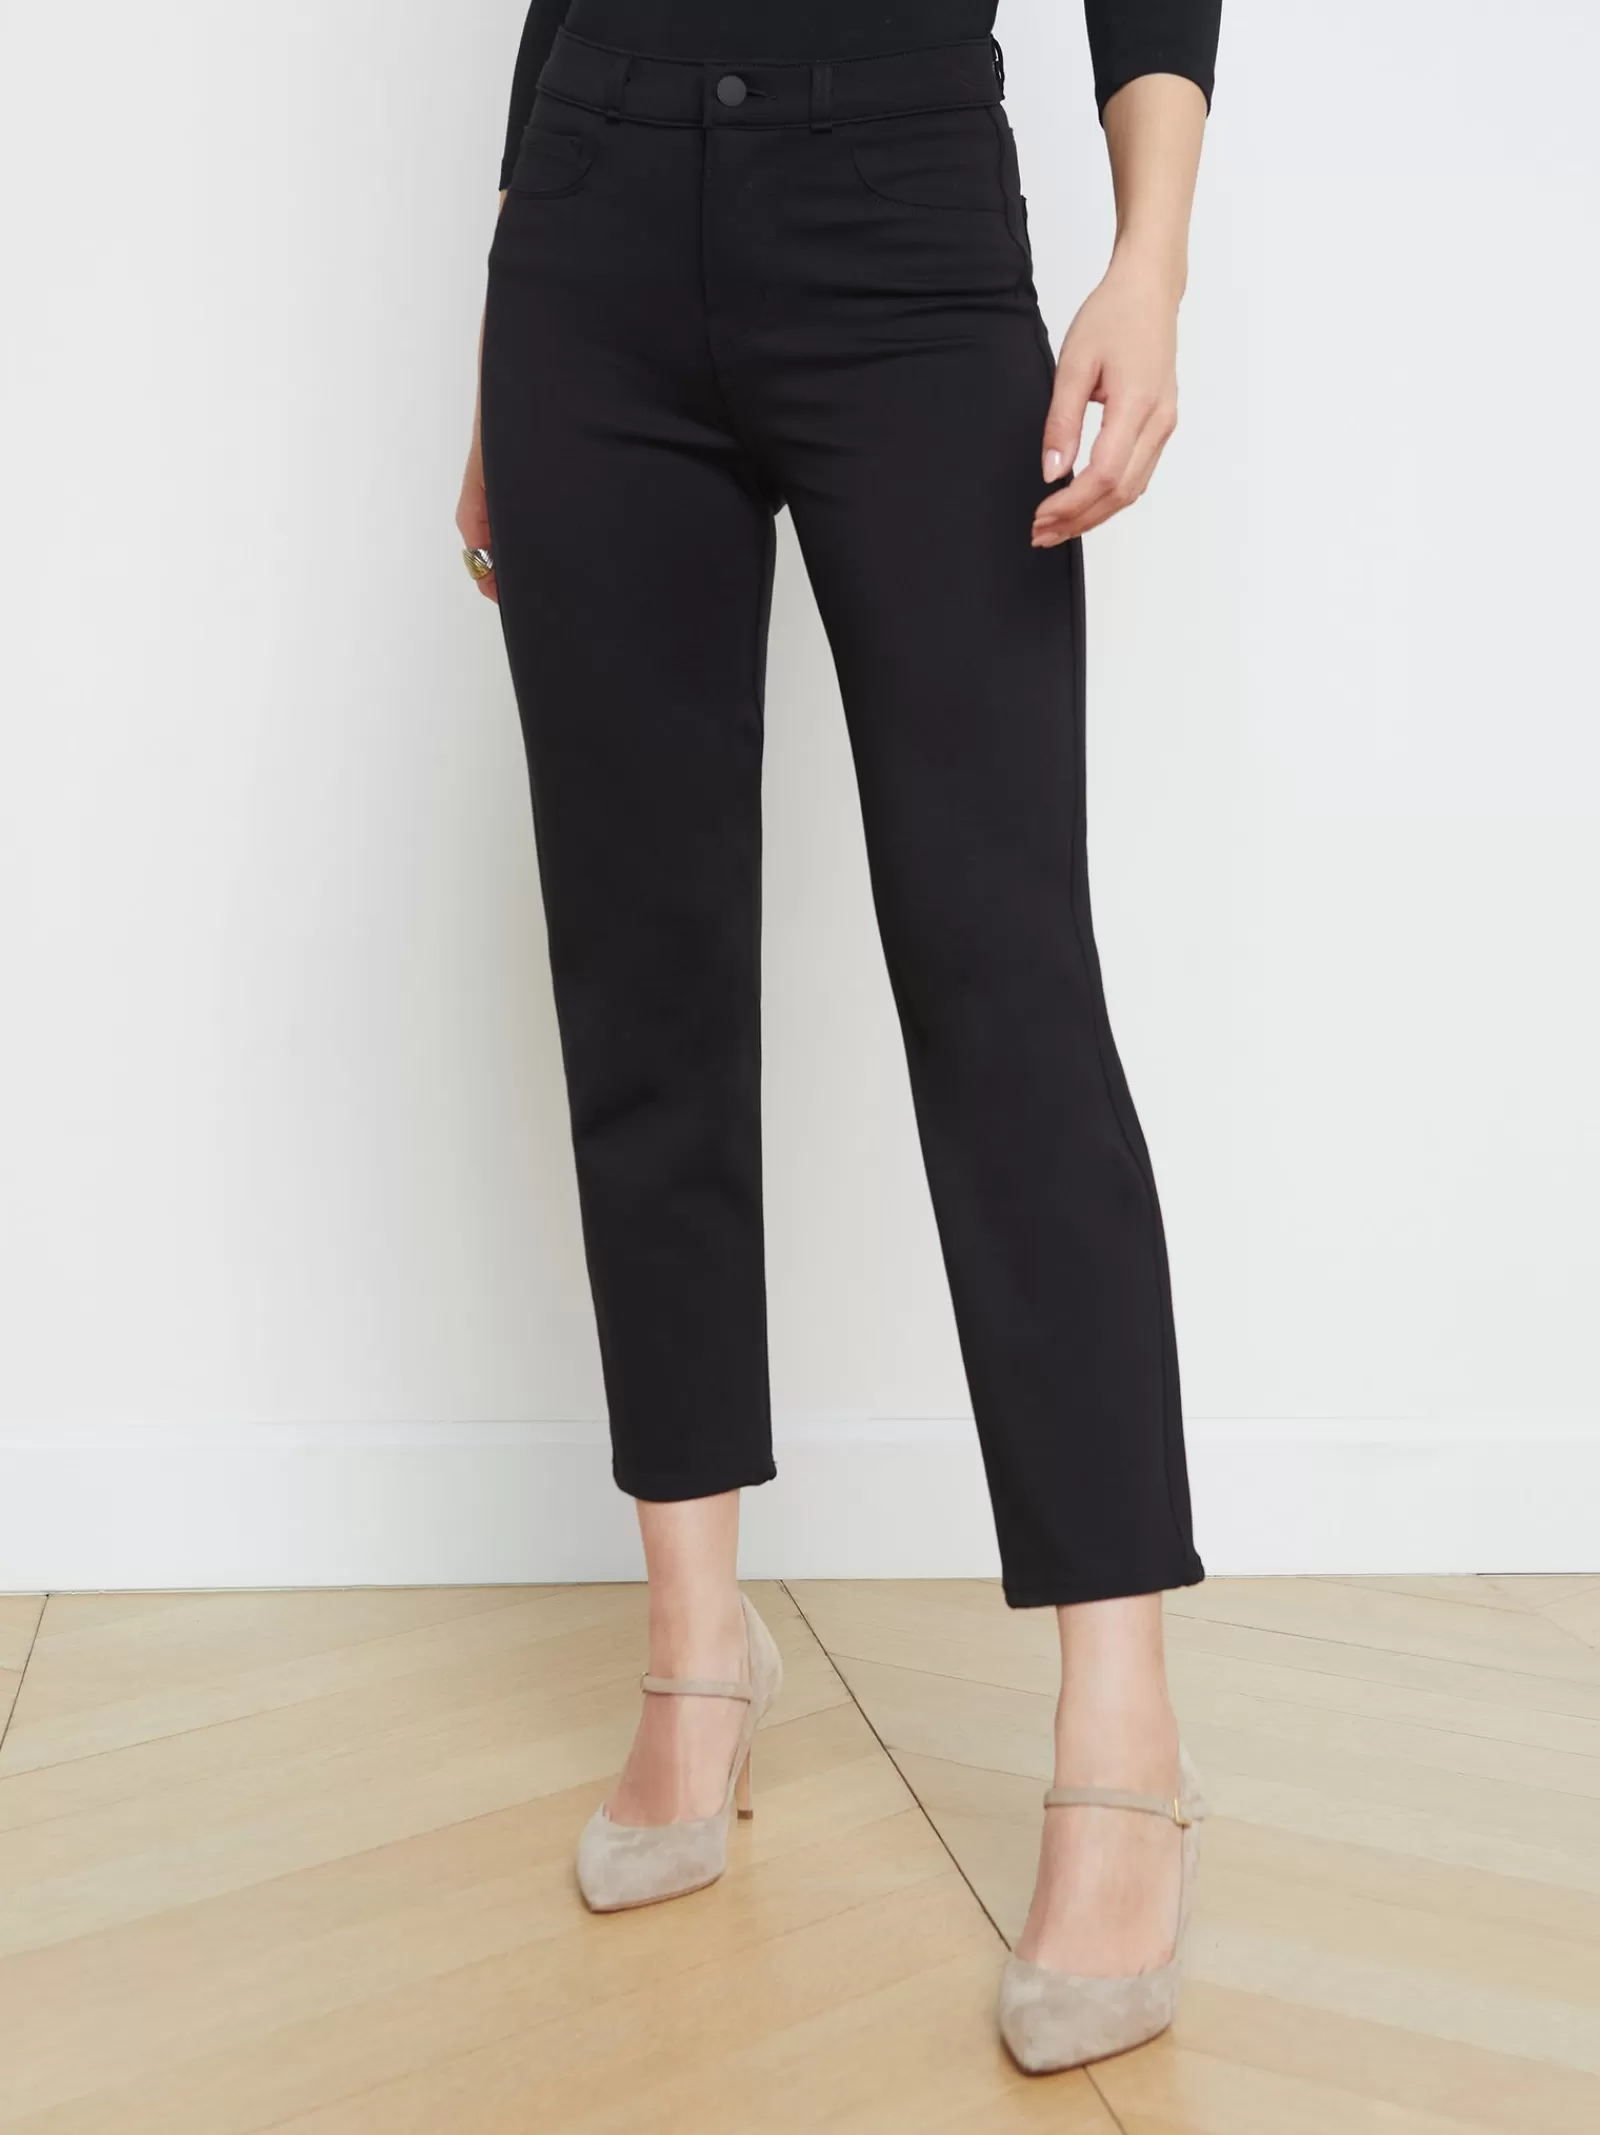 L'AGENCE Alexia Pant< All Things Black